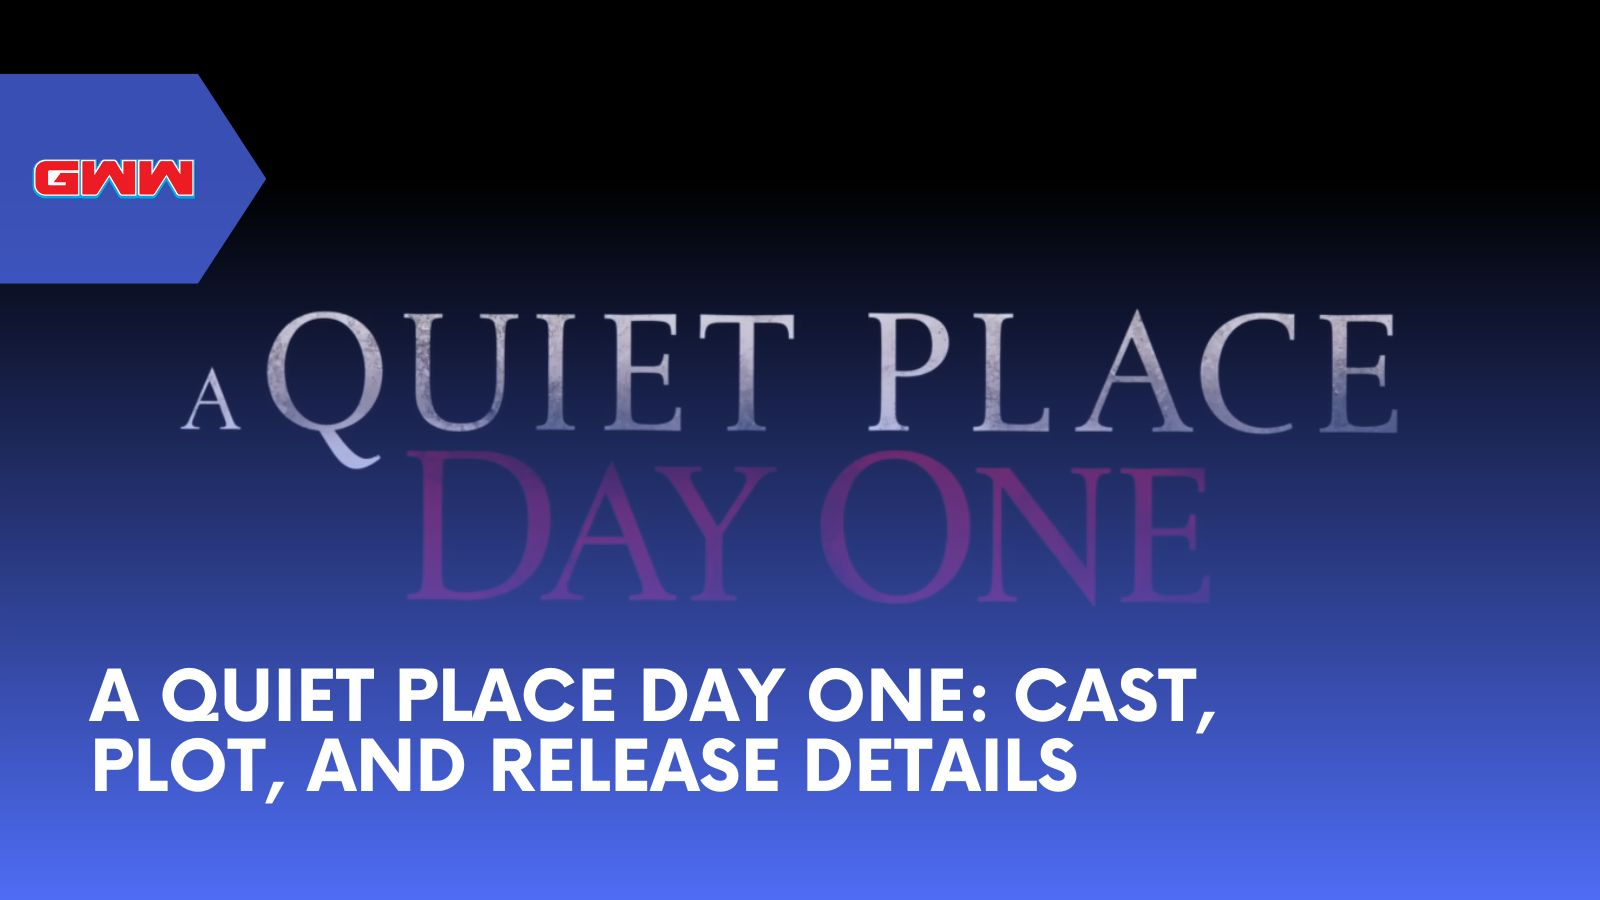 A Quiet Place Day One: Cast, Plot, and Release Details